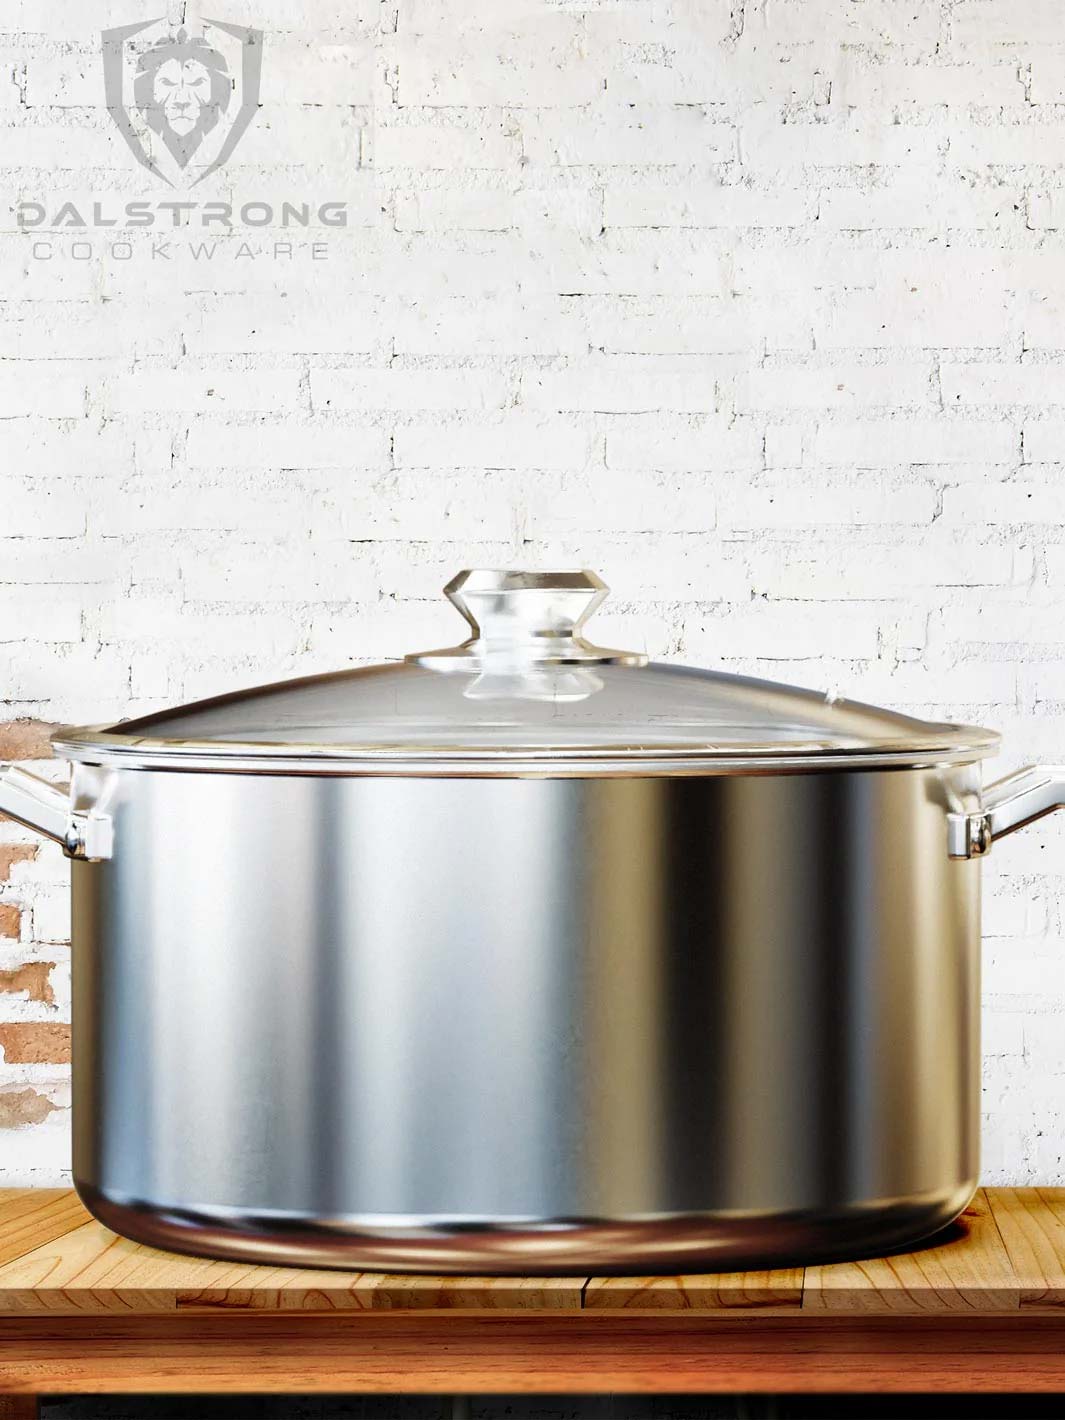 12 Qt Stainless Steel Covered Stock Pot